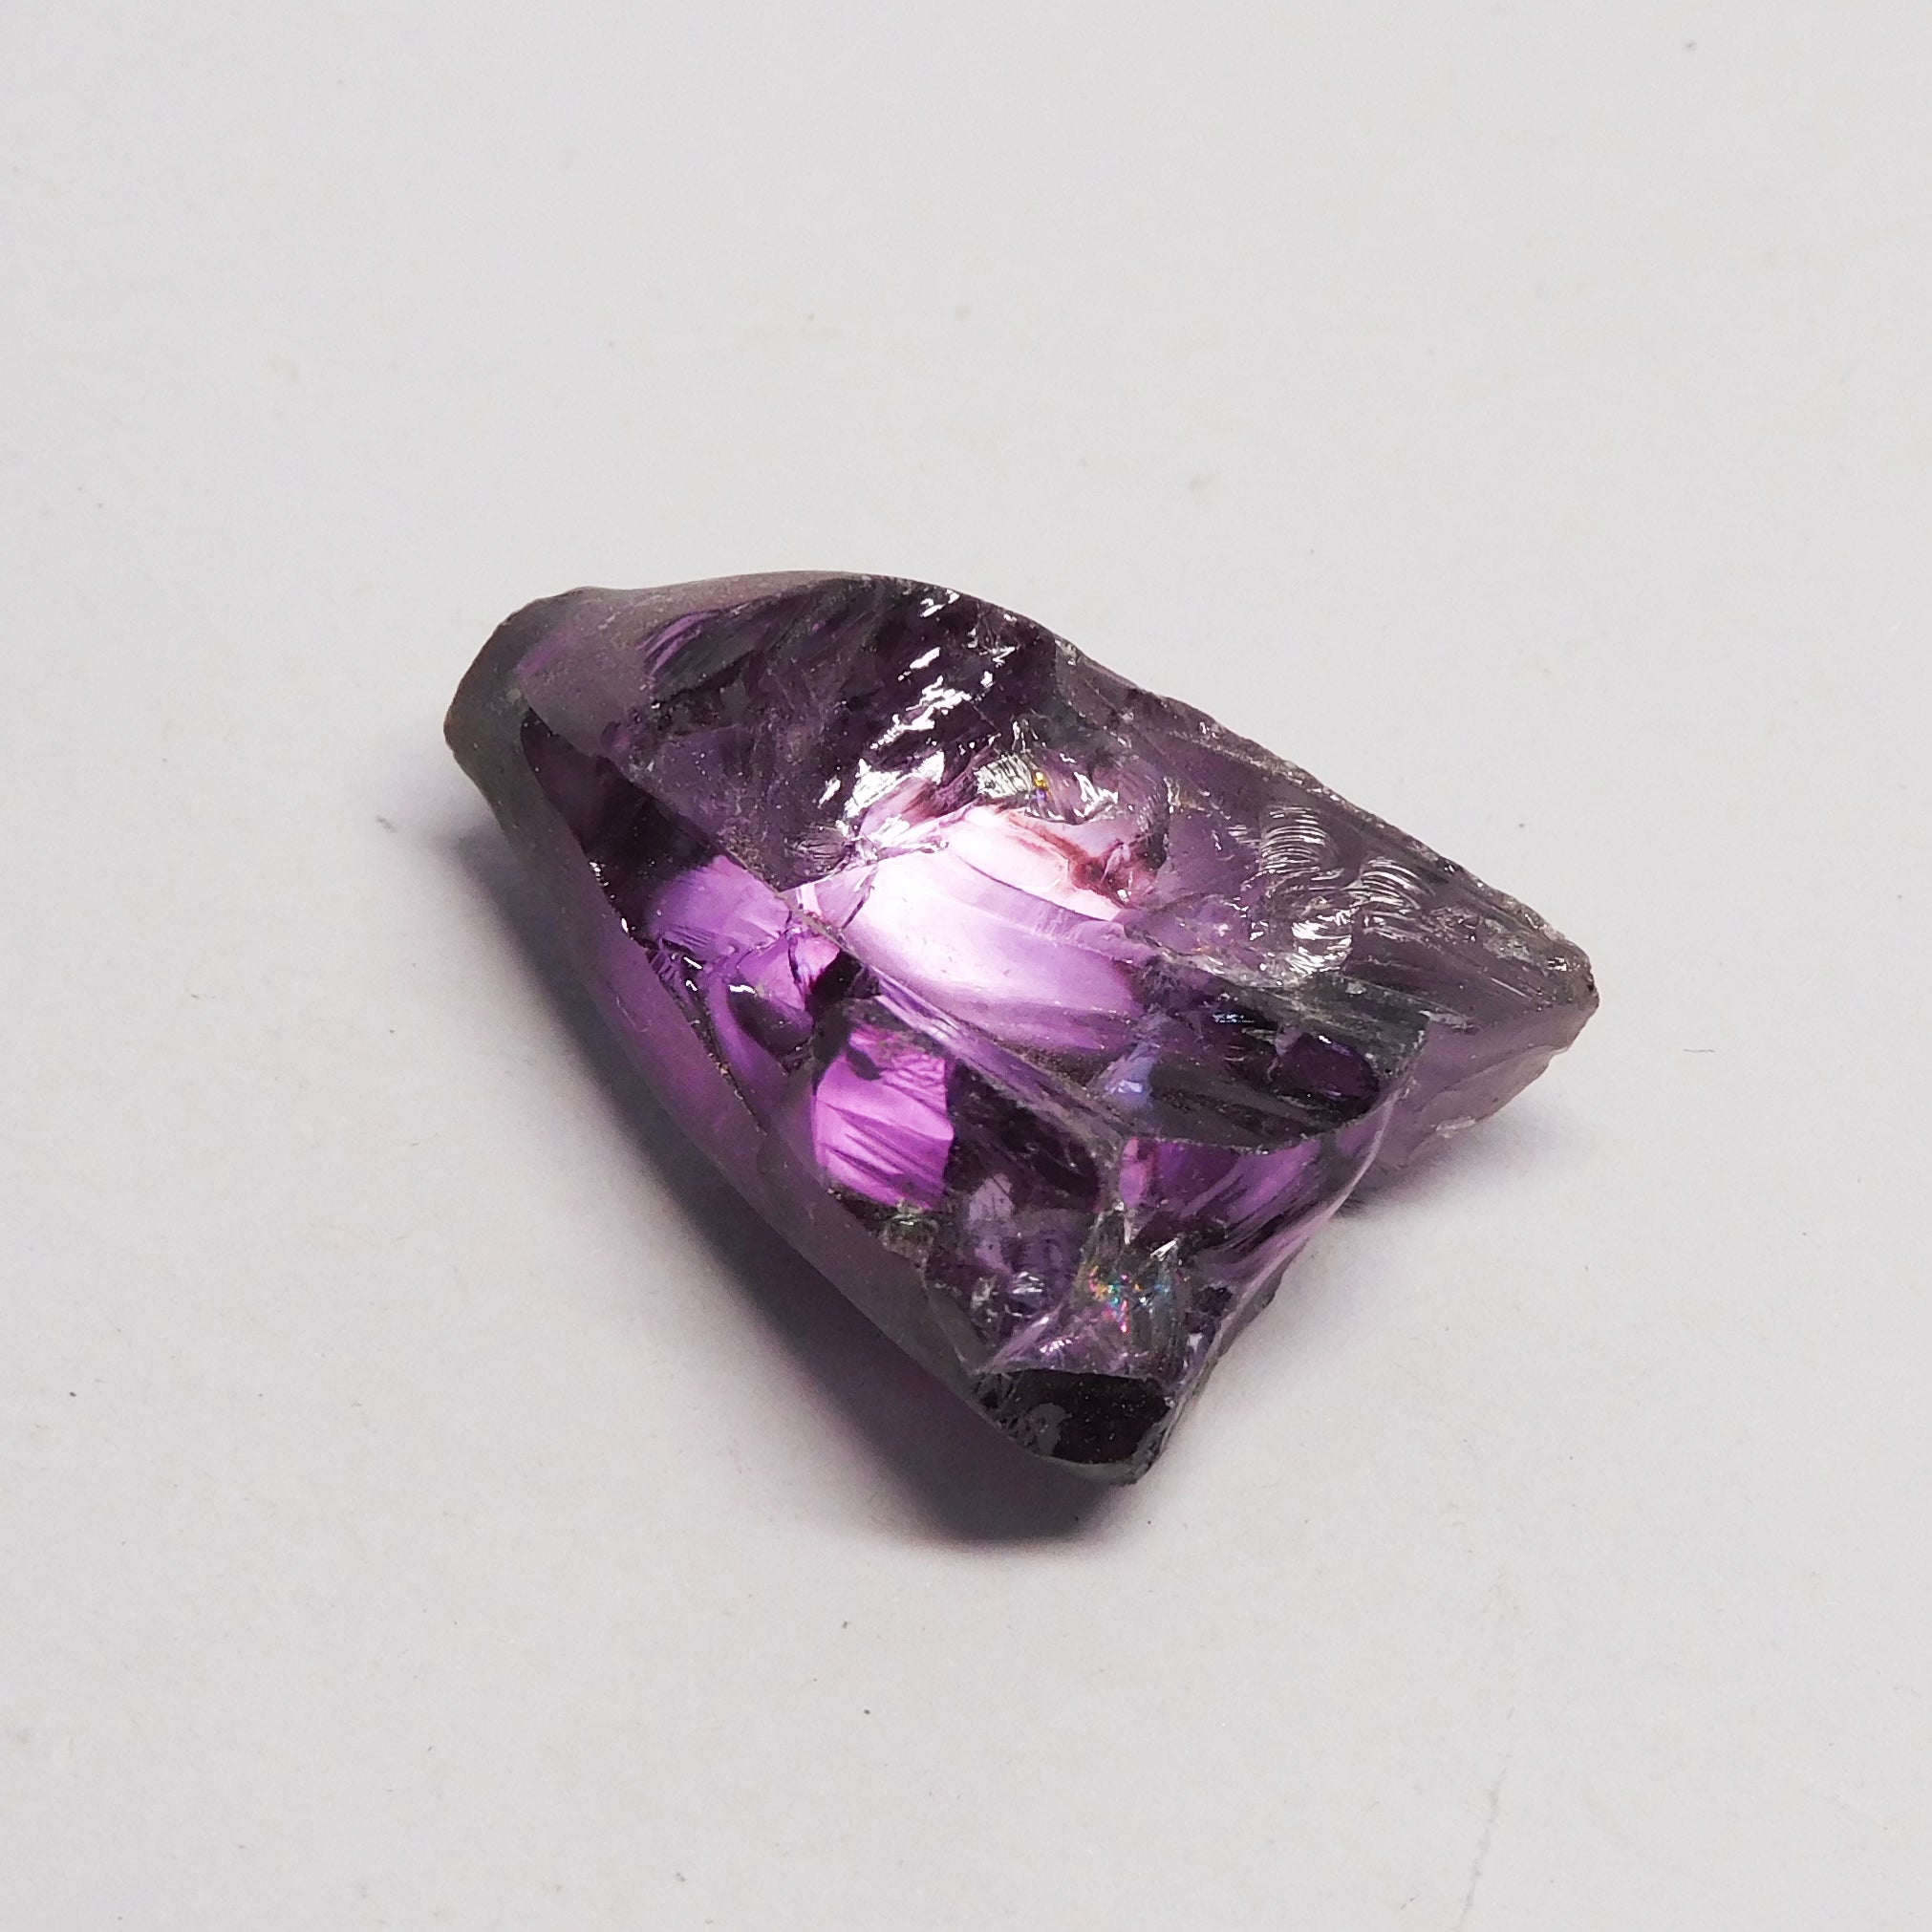 Uncut Rough Natural Color Change Alexandrite 38.70 Carat Loose Gemstone CERTIFIED Mini Cut Rough | Best Offer | Gift For Her/ Him